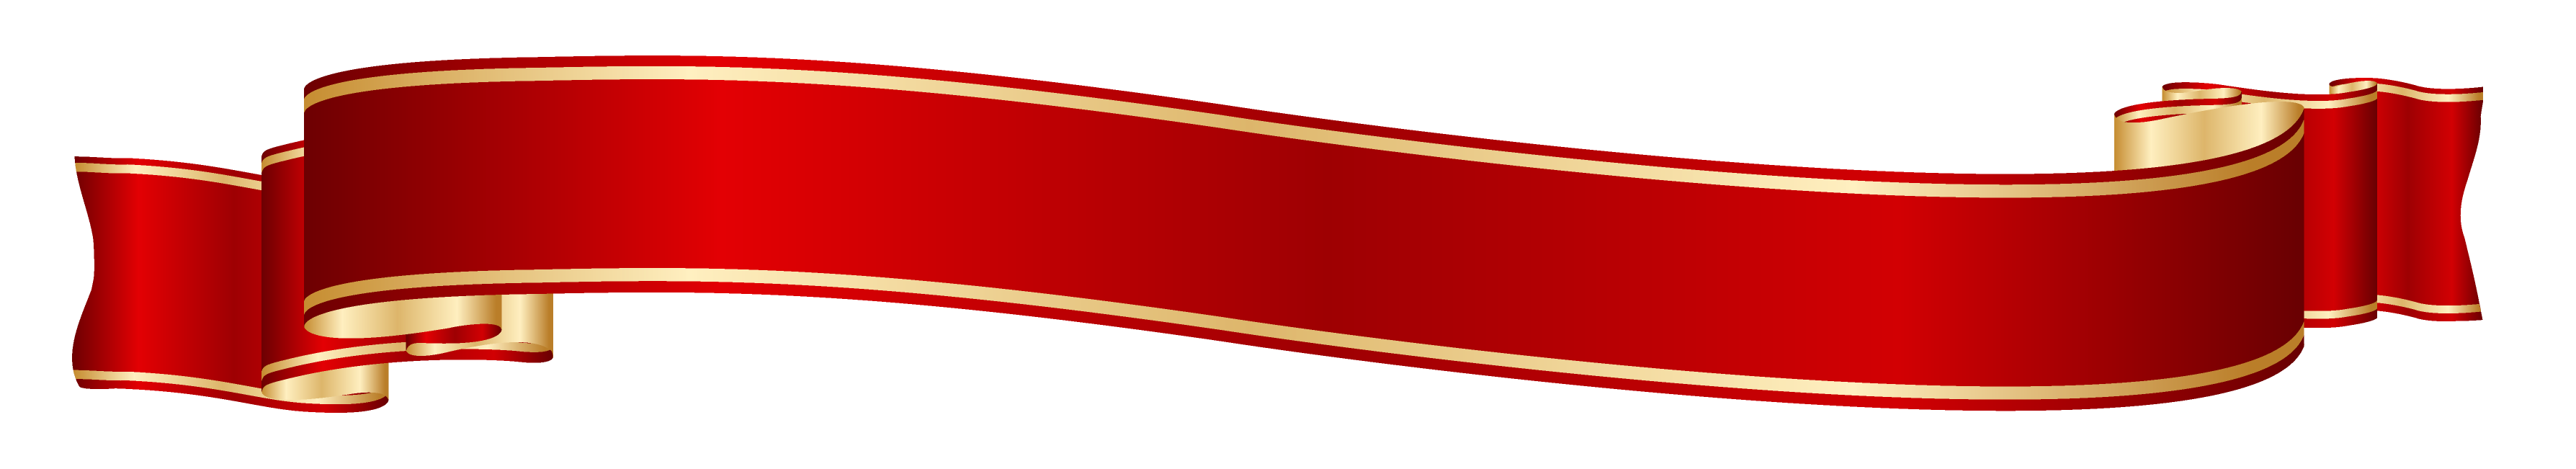 pennant clipart red pennant